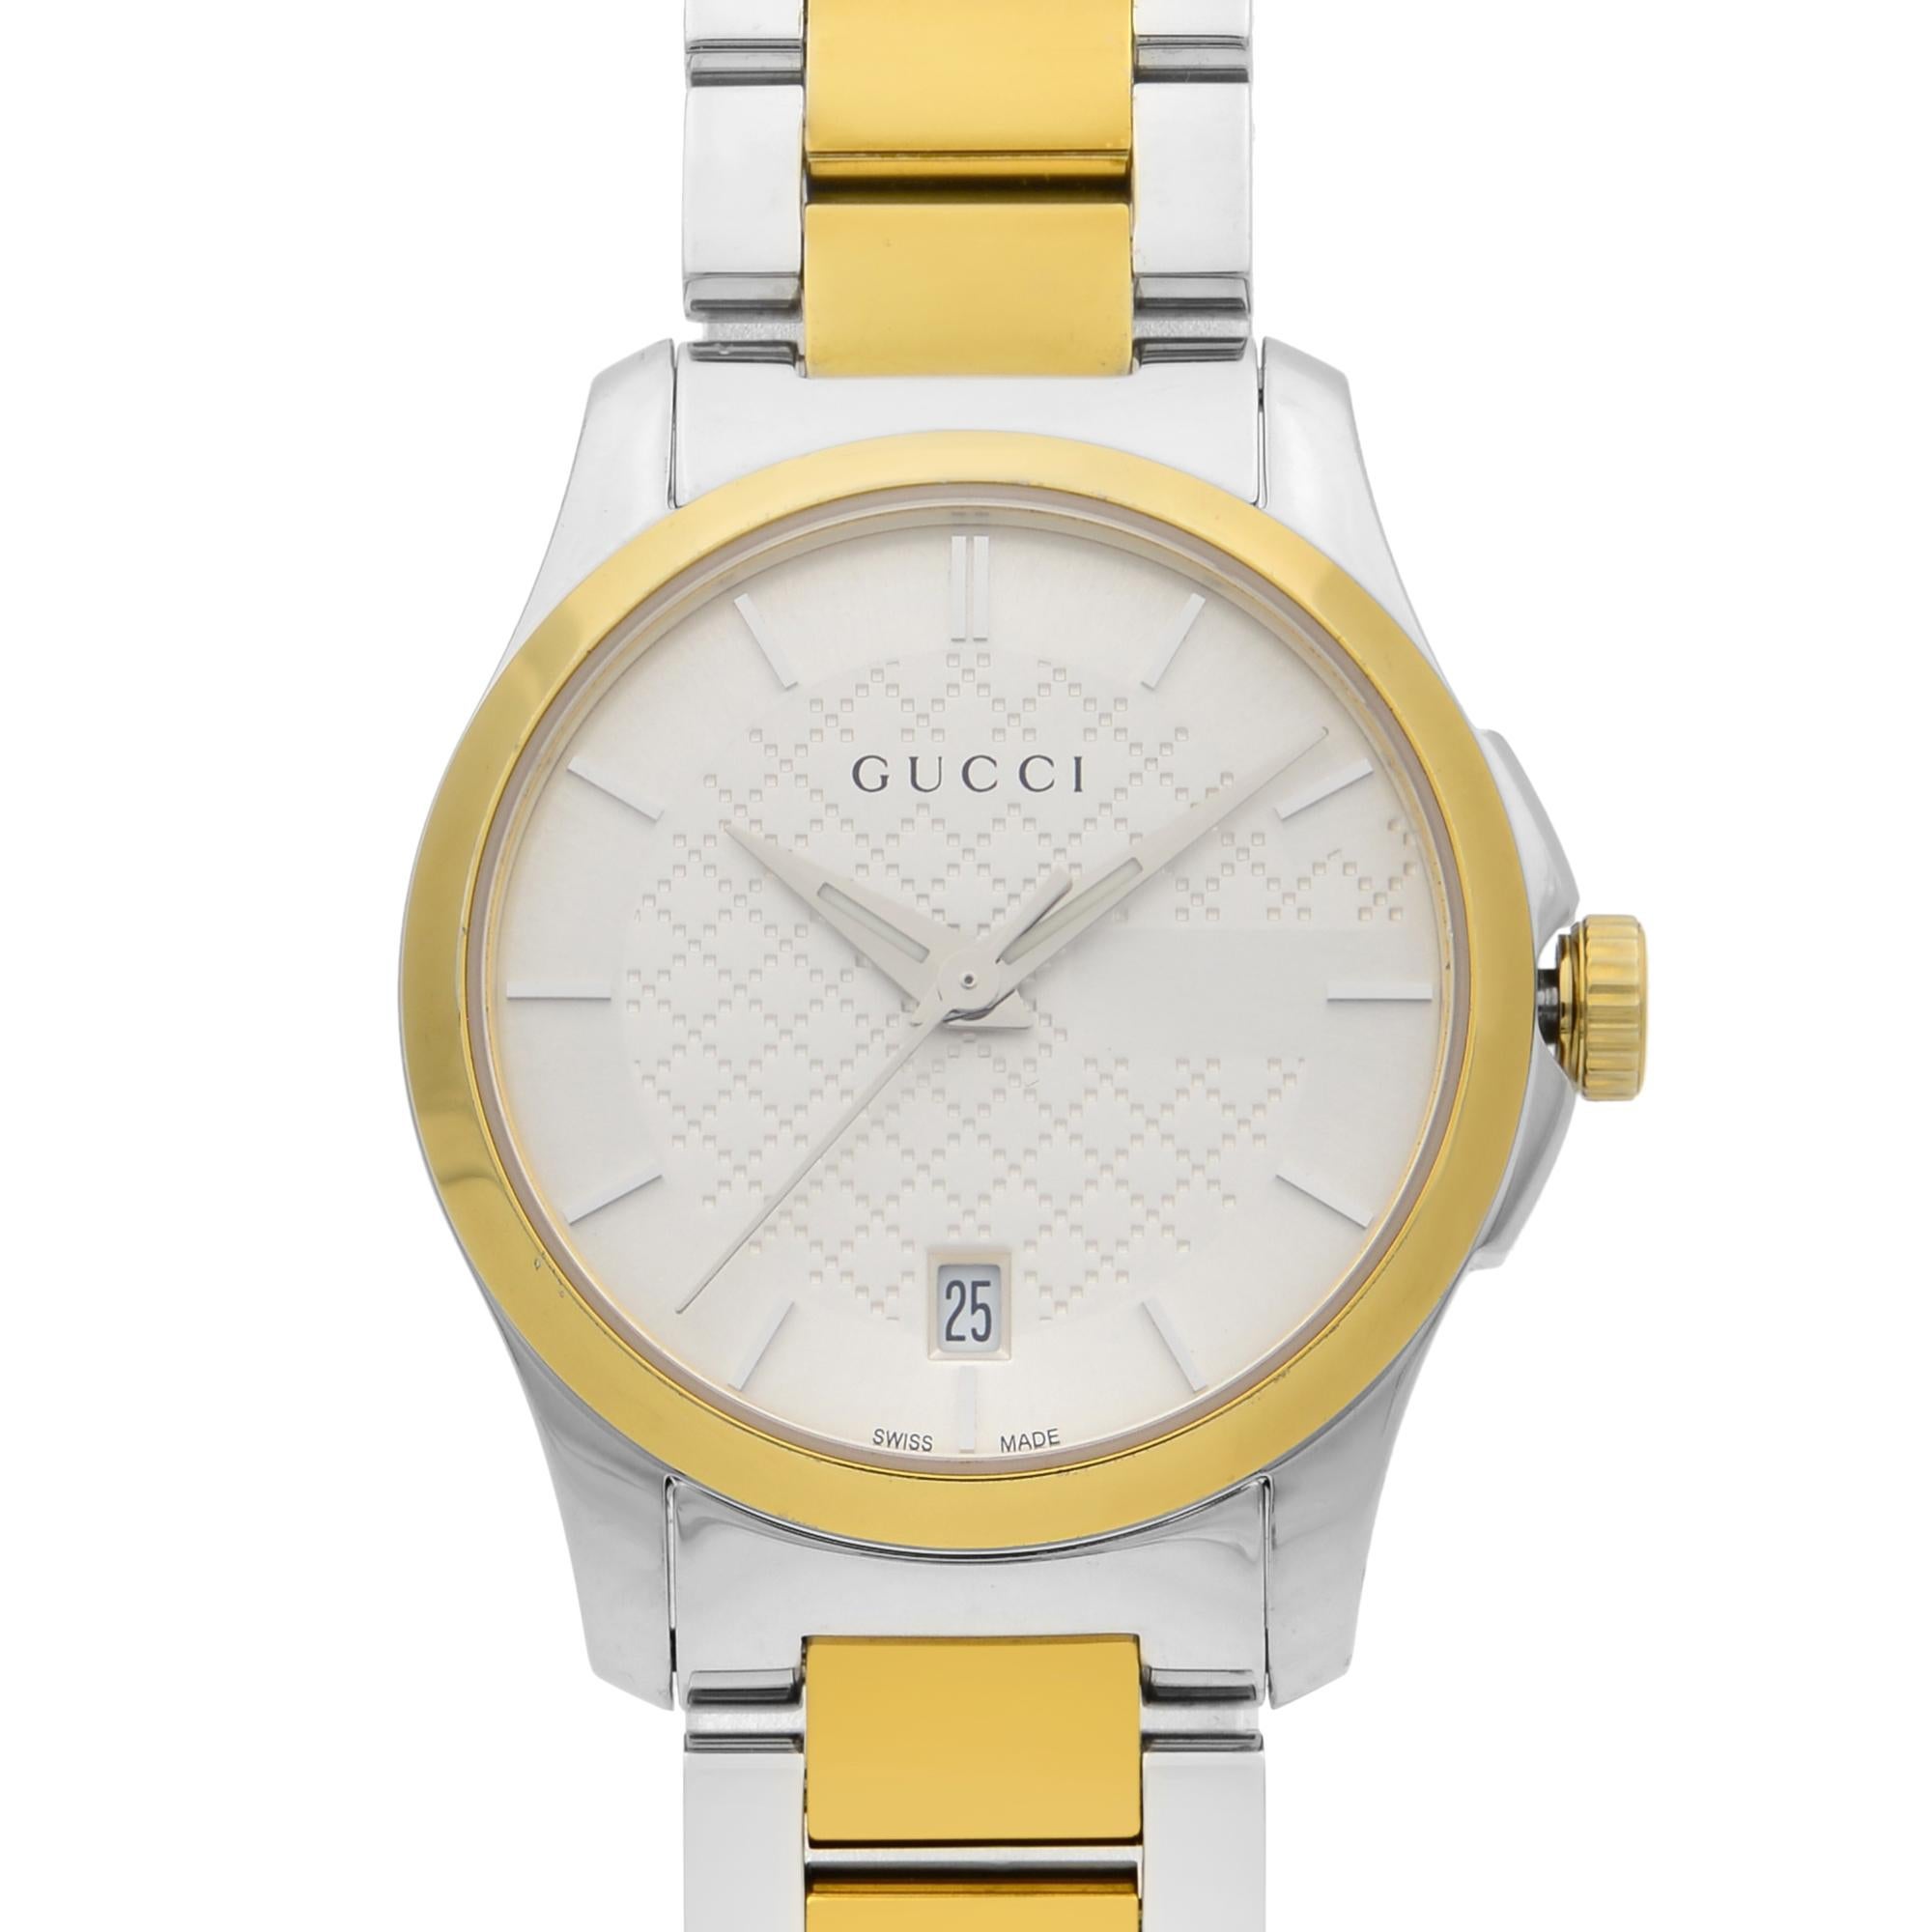 Display Model Gucci G-Timeless Stainless Steel Gold-Tone Silver Dial Ladies Watch YA126531. Timepiece Might Have Insignificant Blemishes During Store Display. Comes with Original Box and Papers. Covered by 3-year Chronostore Warranty.
Details:
MSRP